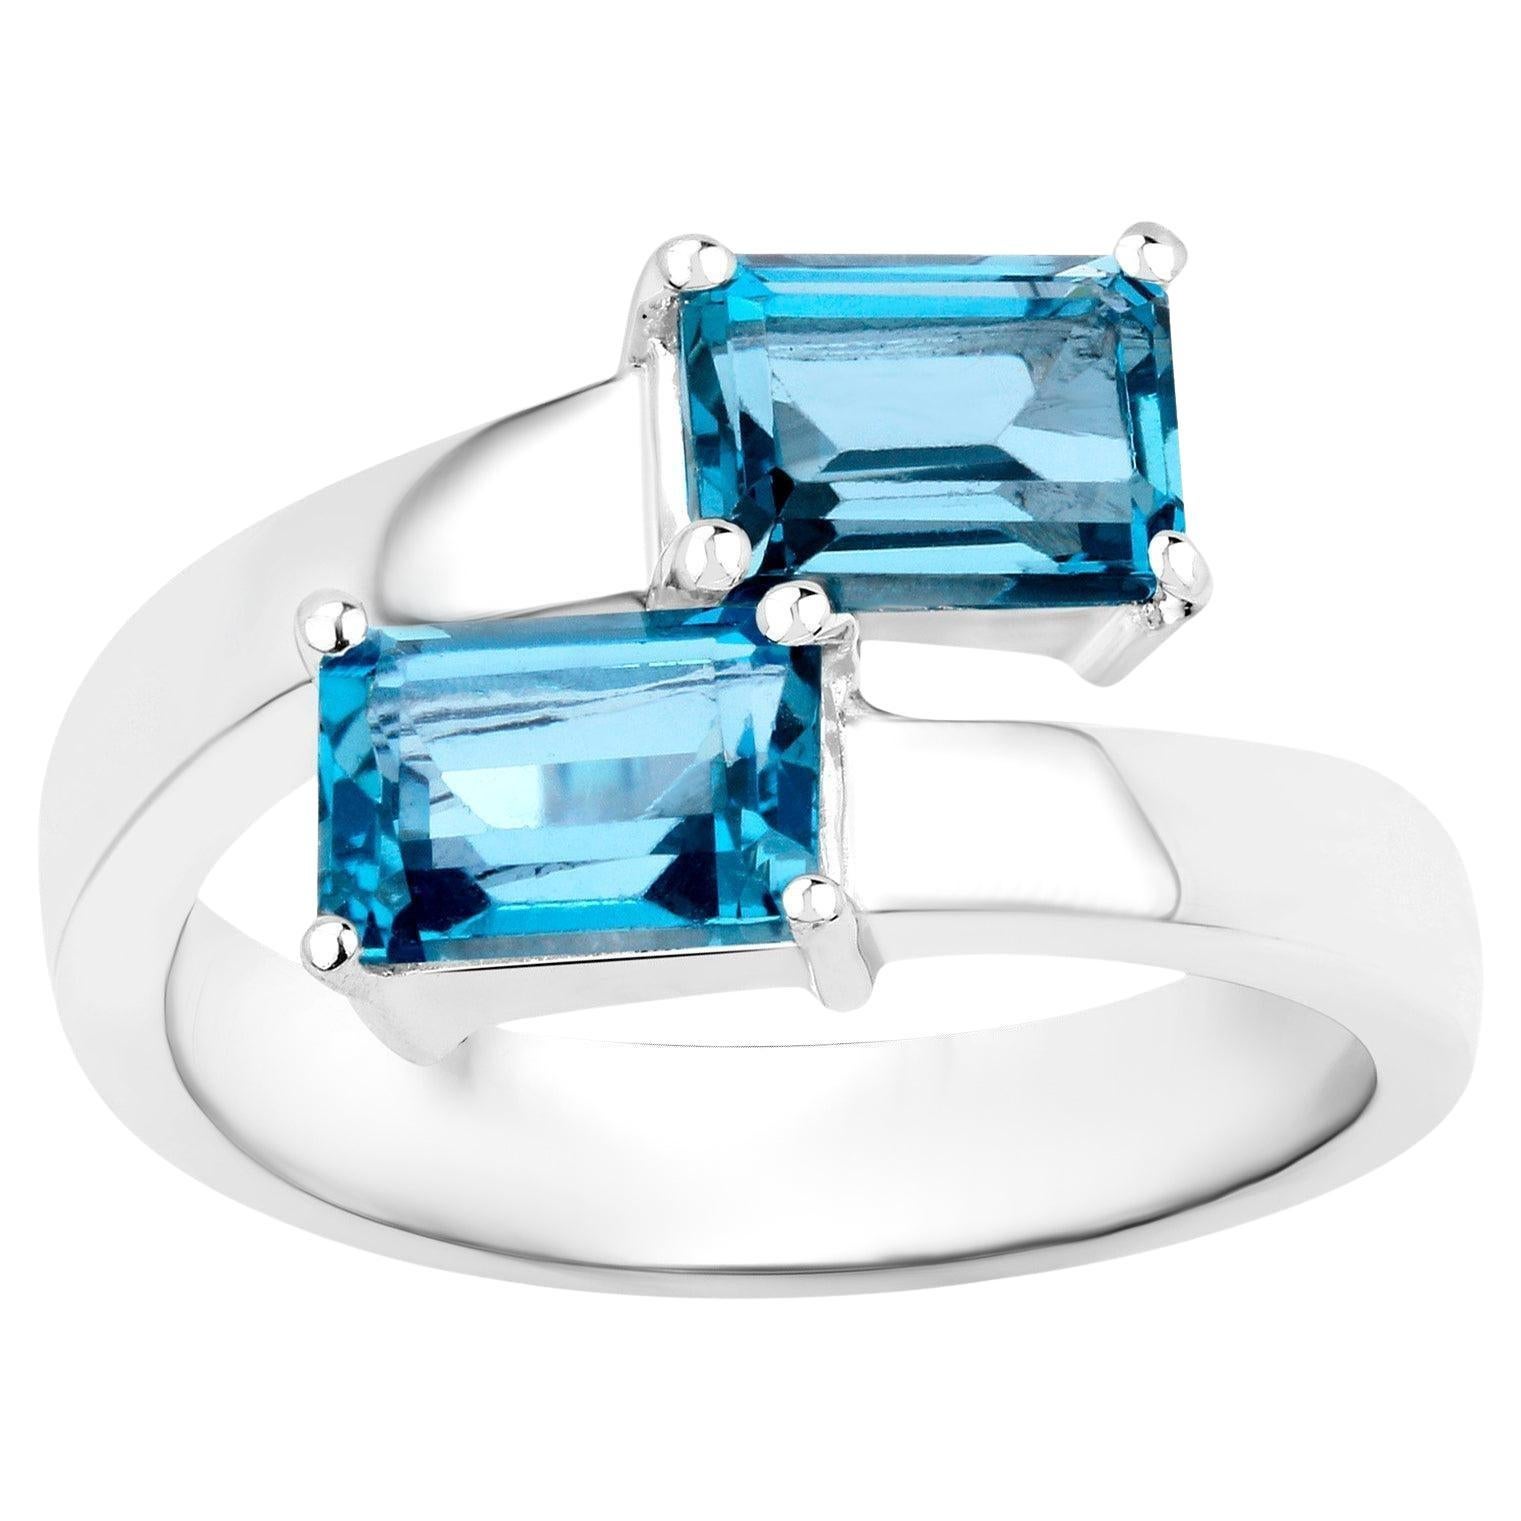 What is a London blue topaz?